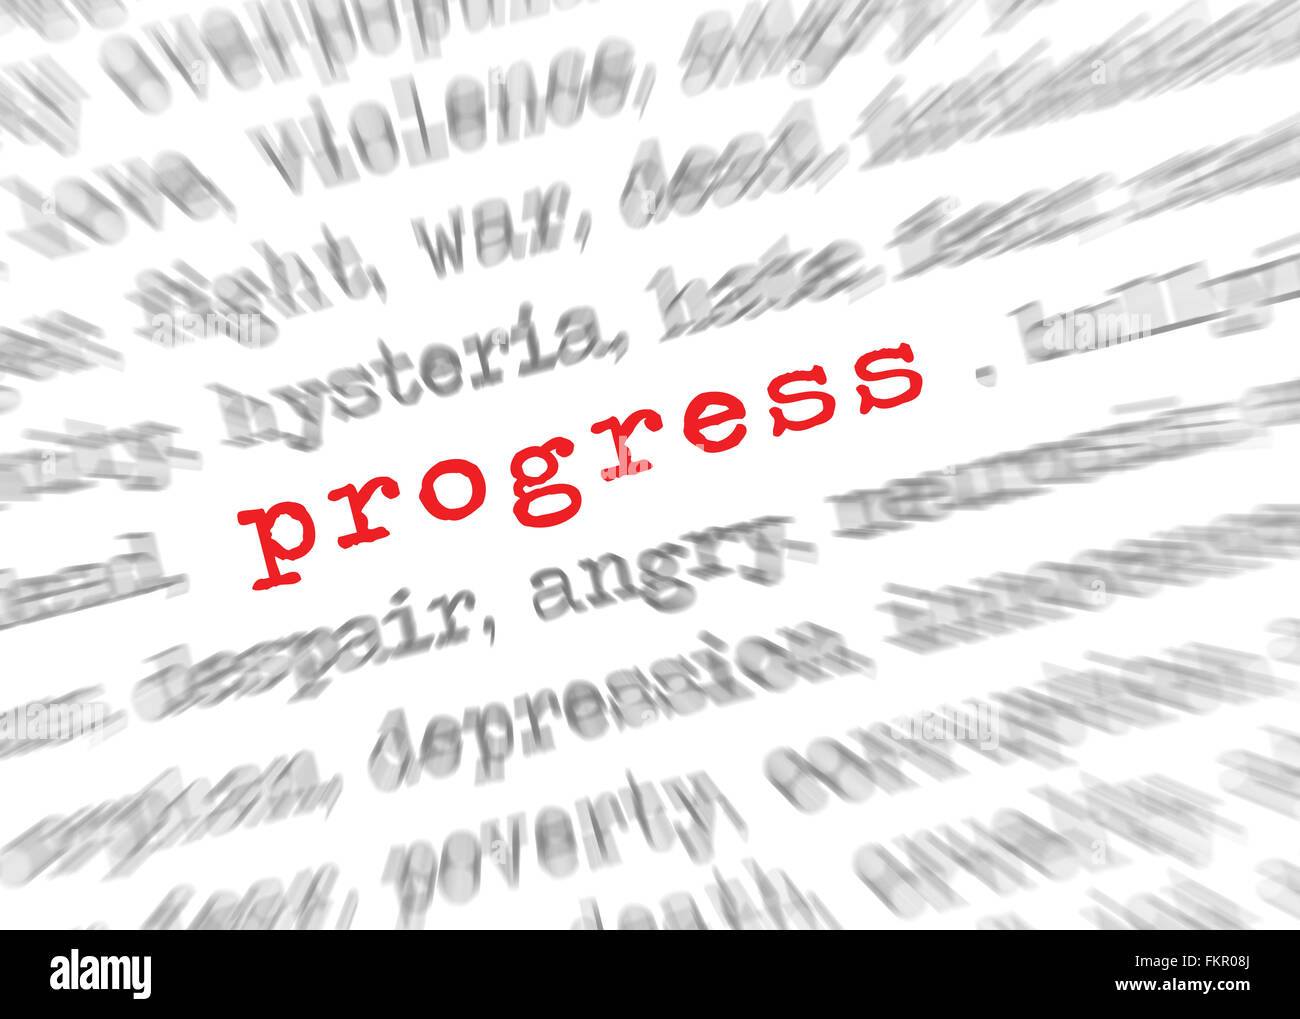 Blured text zoom effect with focus on progress Stock Photo